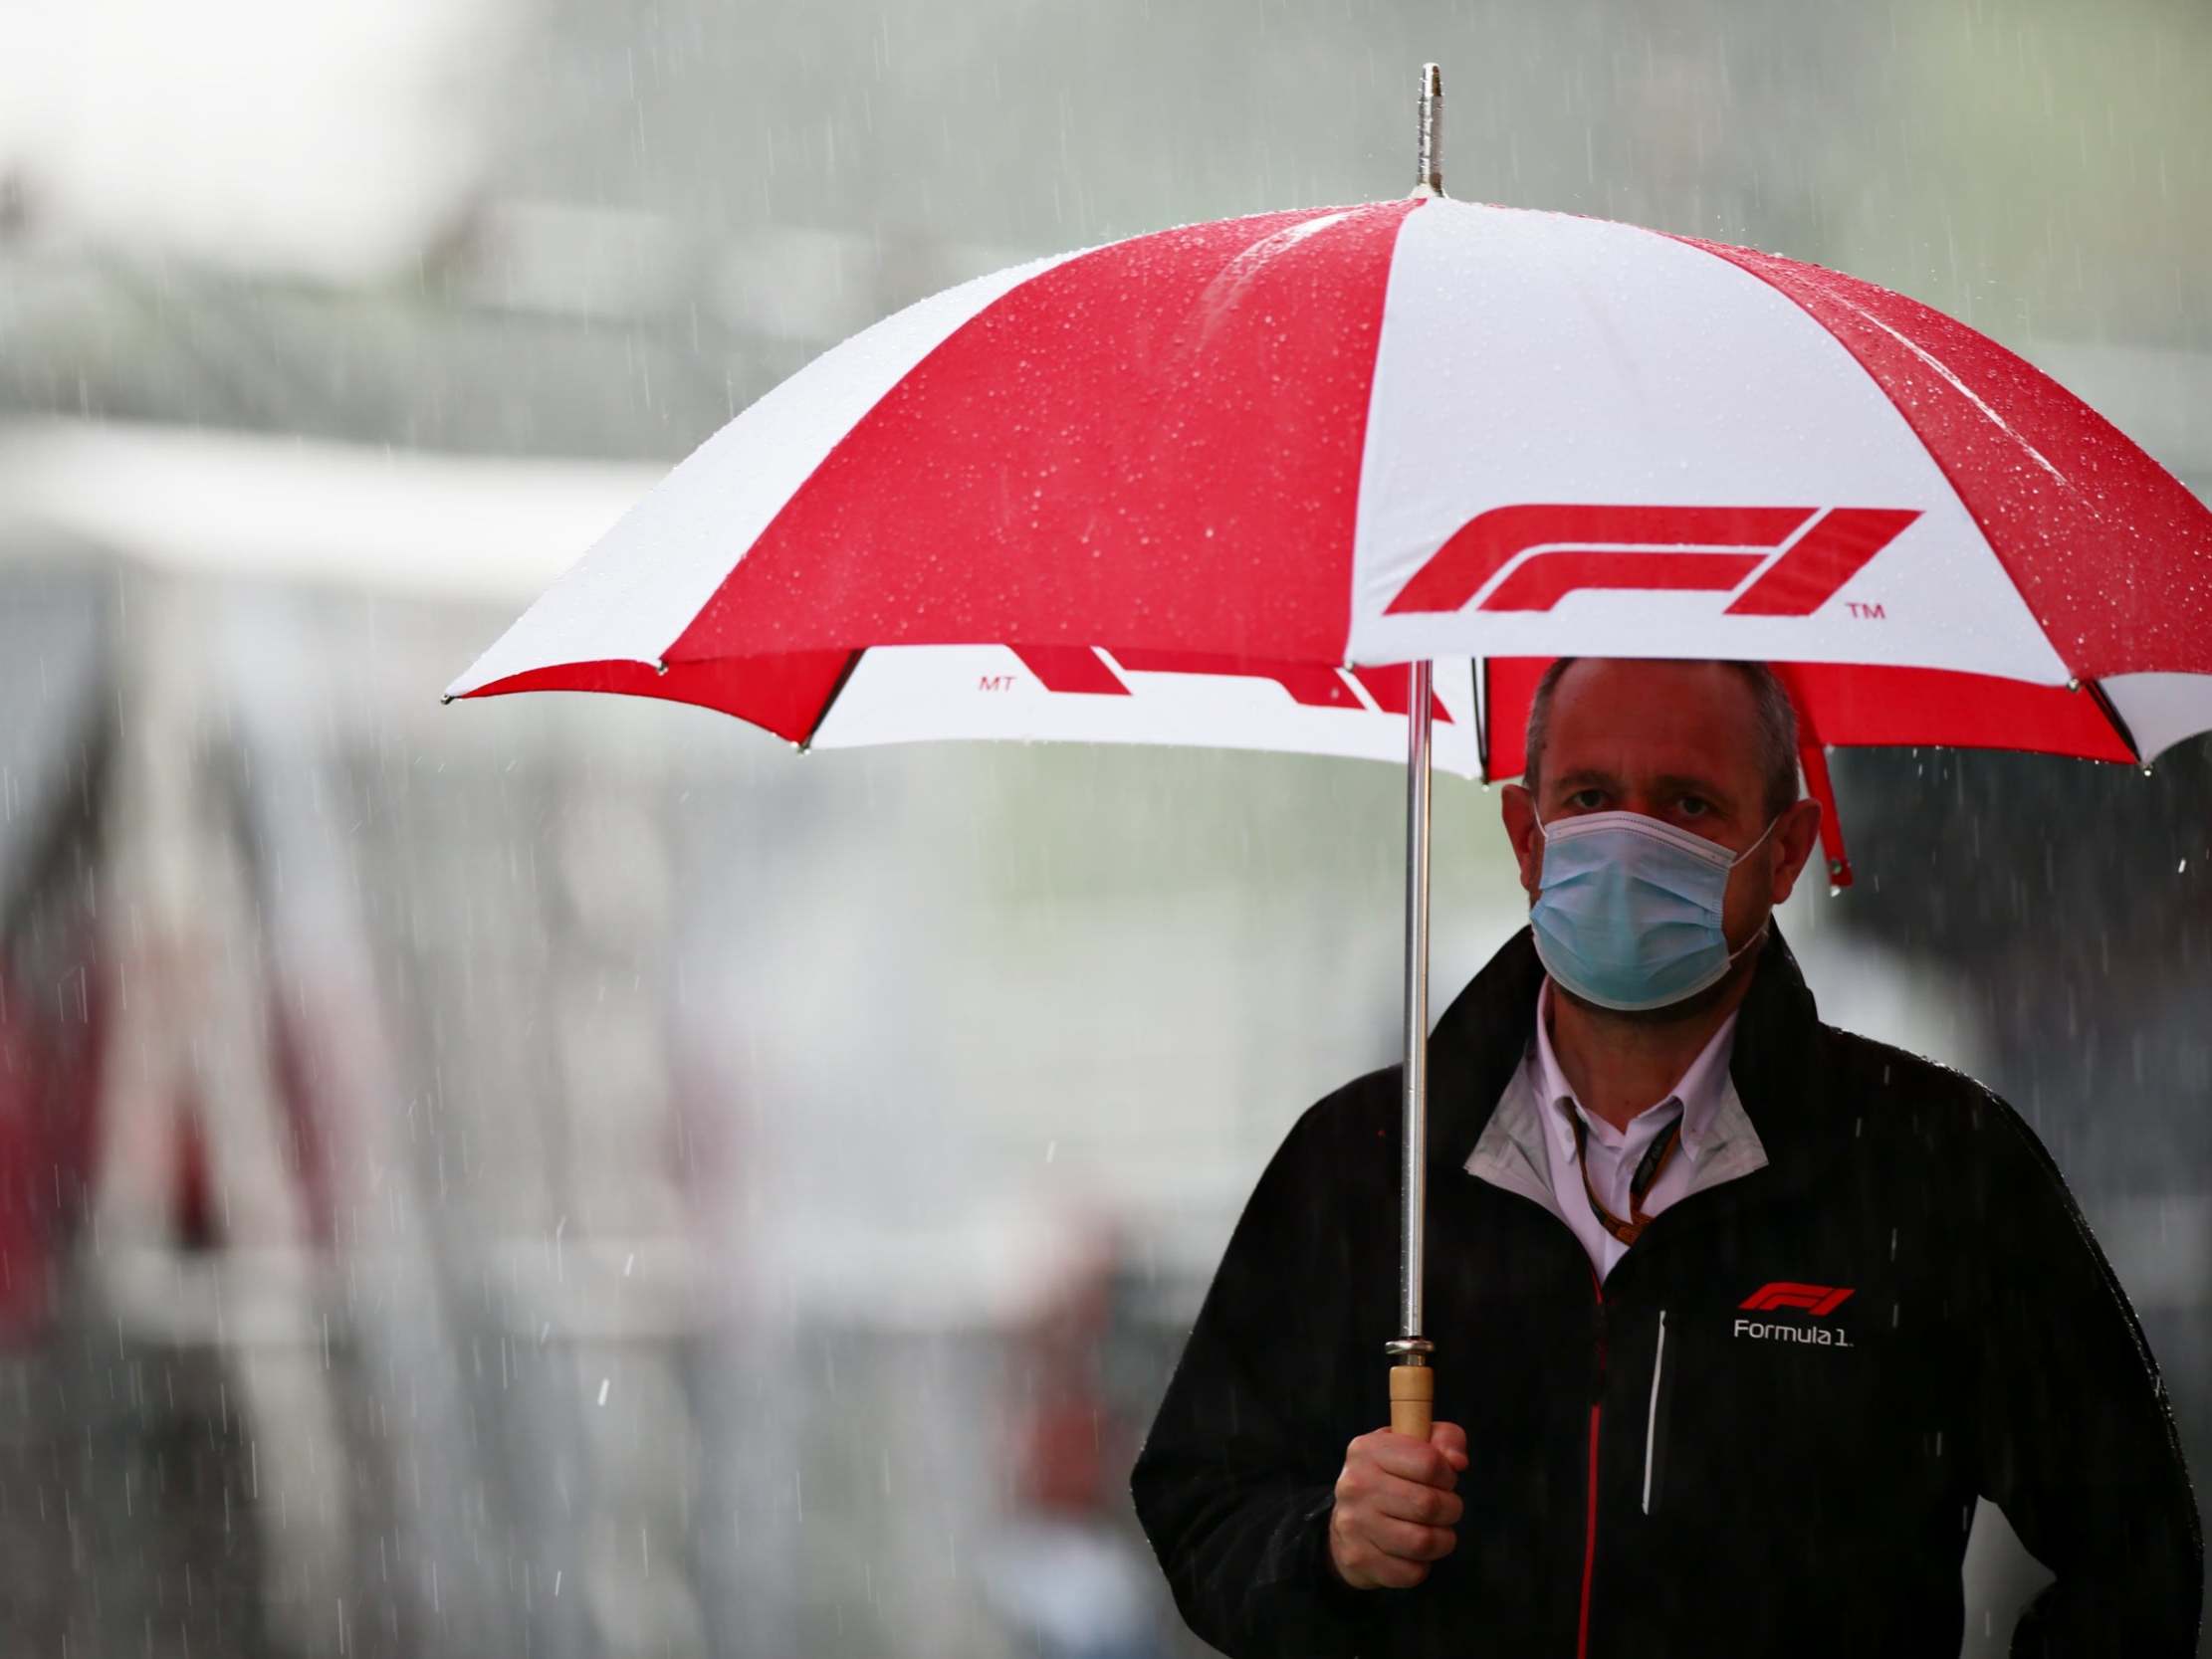 Styrian Grand Prix: F1 qualifying at risk of being cancelled as heavy rain hits Red Bull Ring